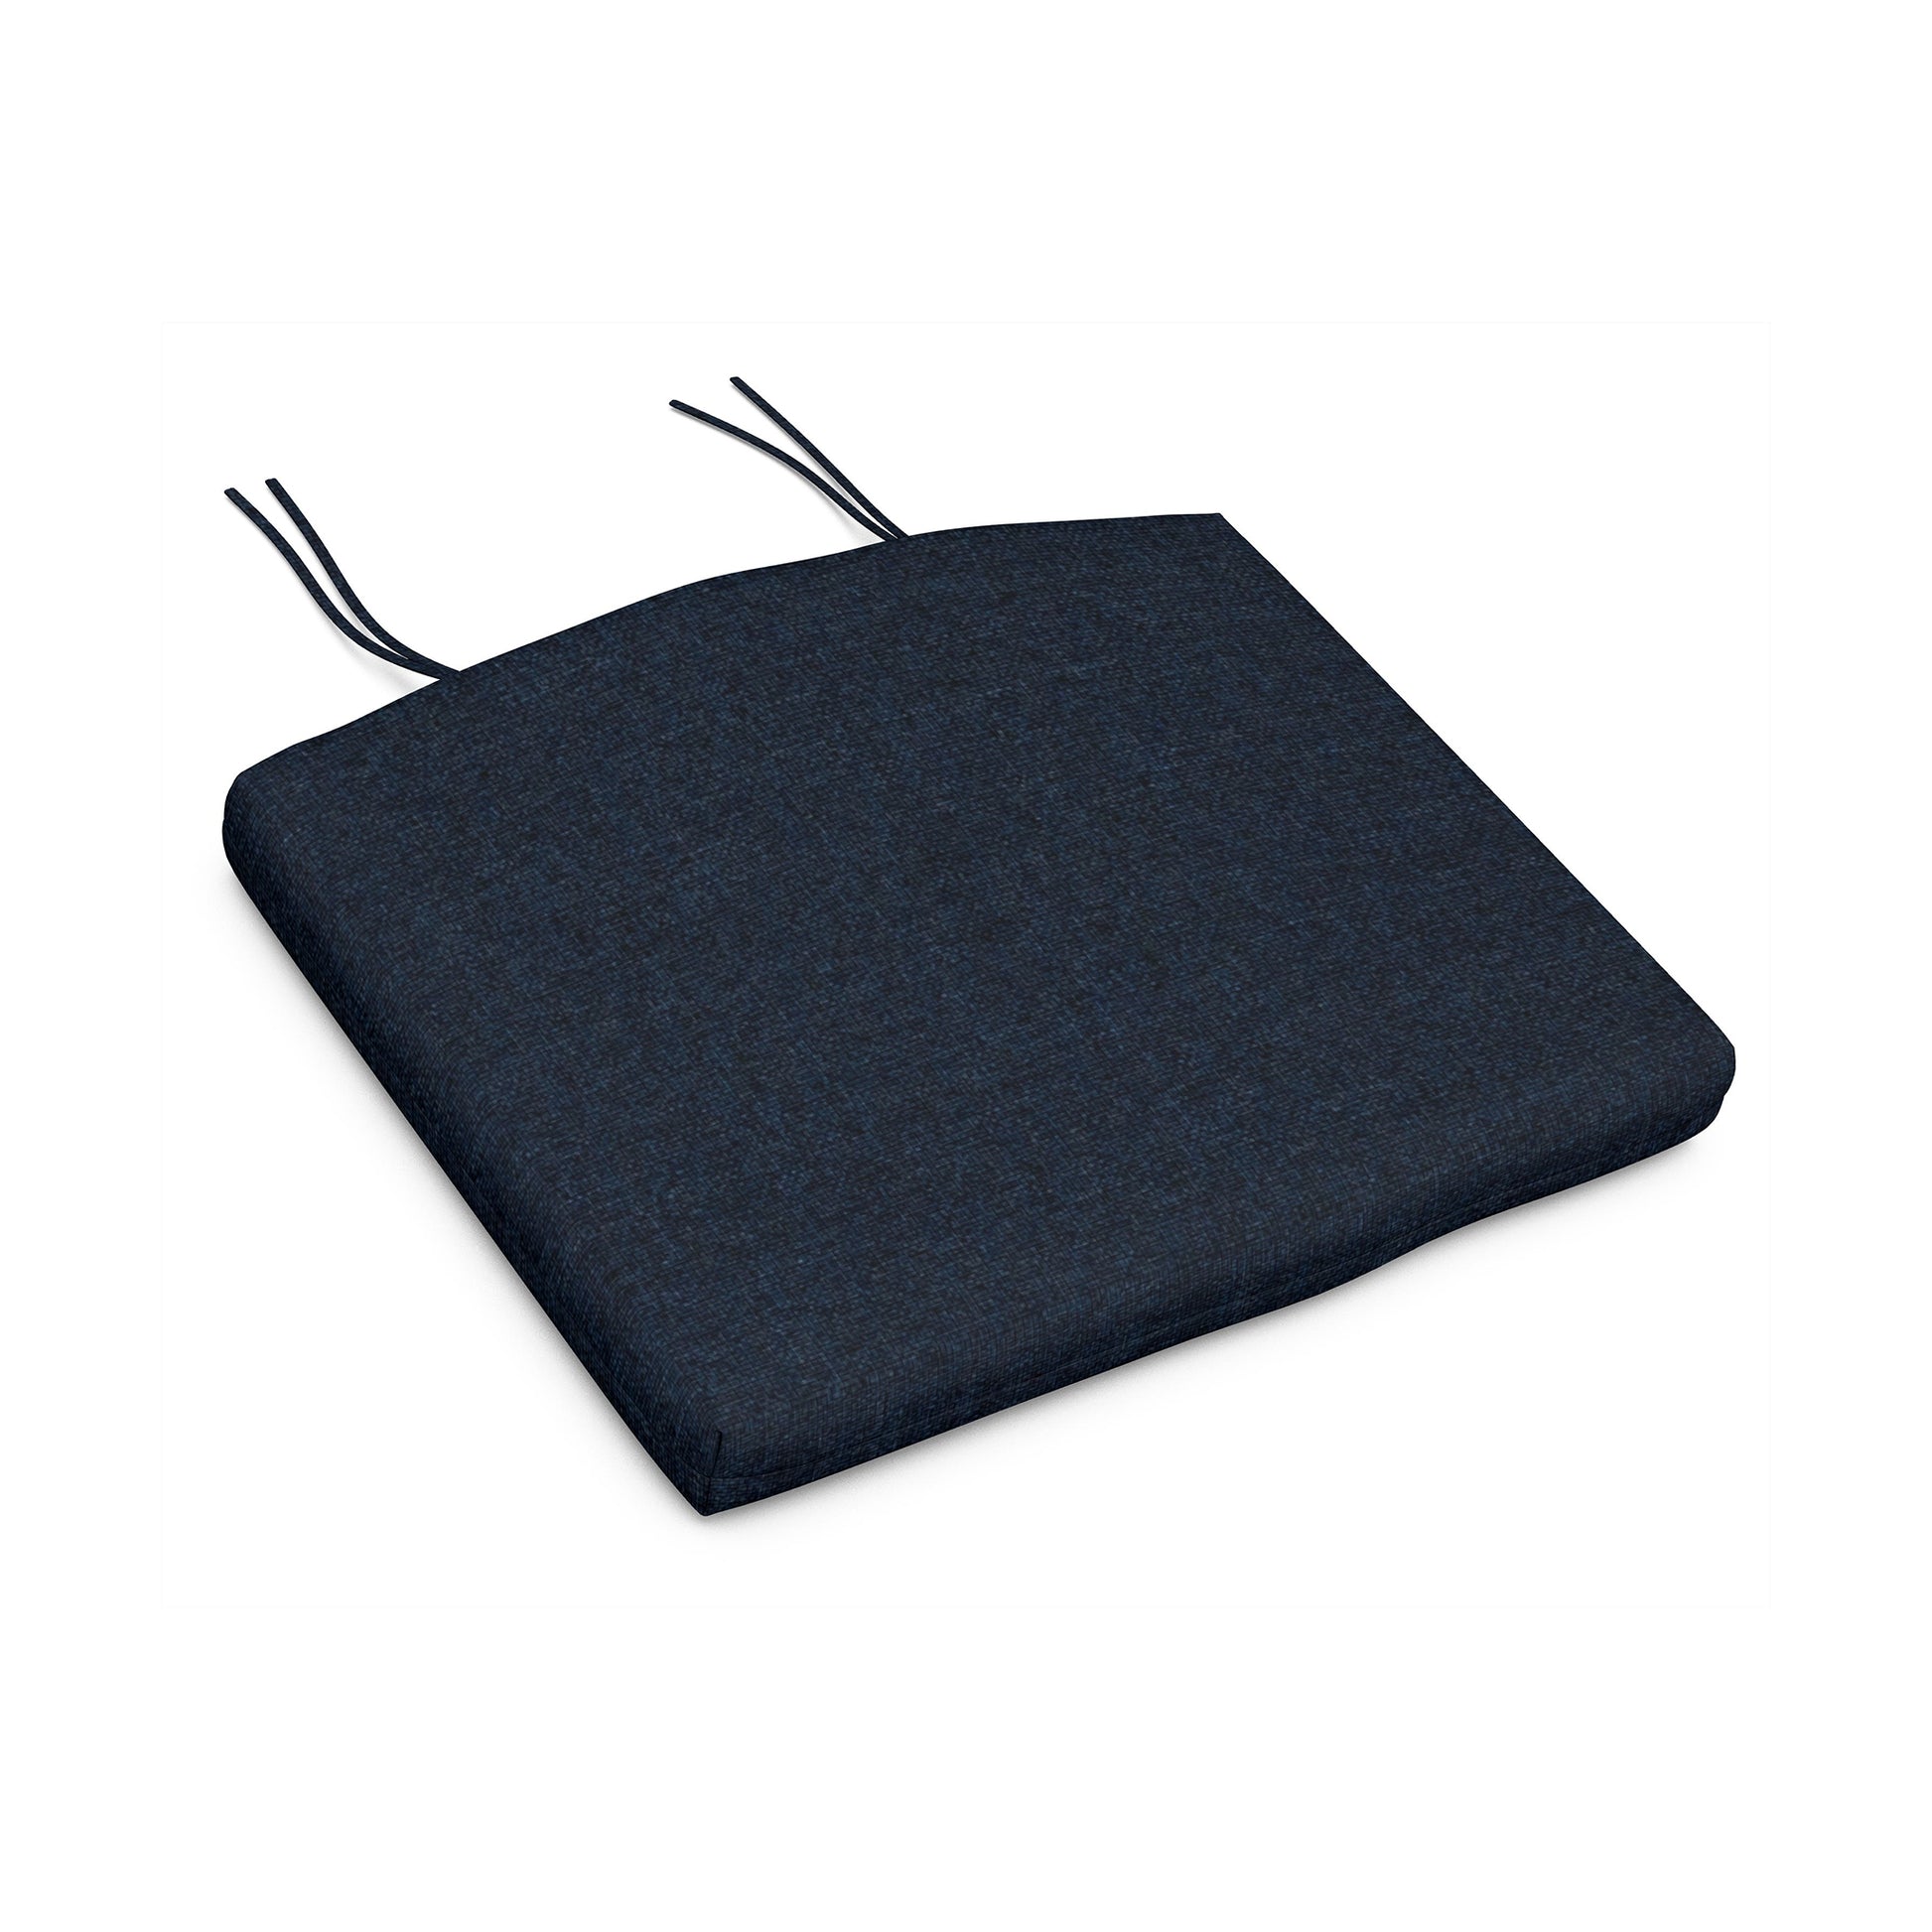 A square, navy blue POLYWOOD Adirondack chair cushion with two black tie straps at the back, isolated on a white background.